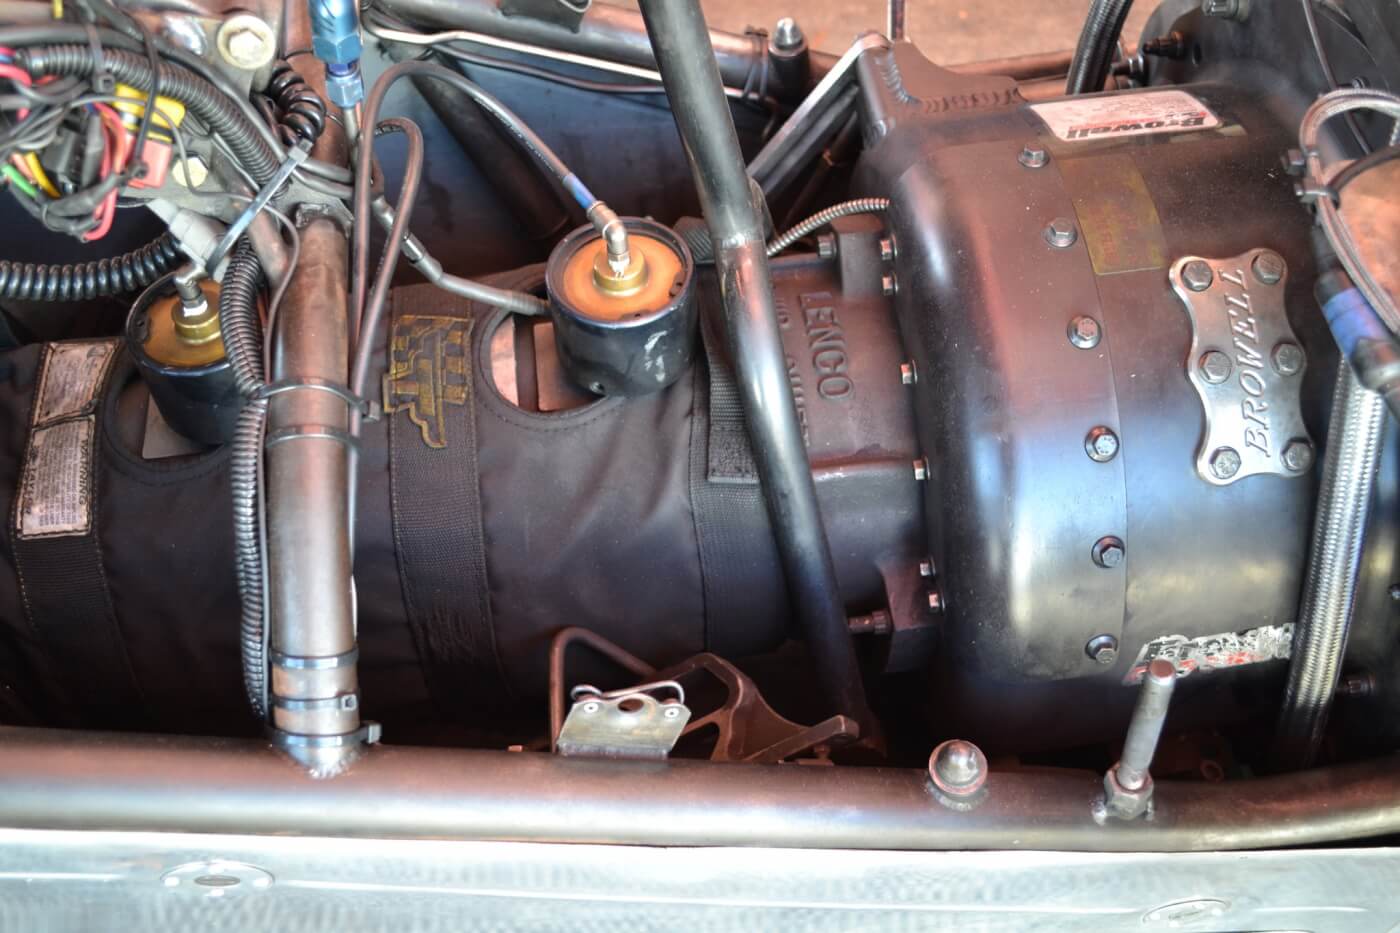 Moving away from a diesel transmission meant going to a strong and light Lenco CS1 three speed transmission. Connecting the Lenco to the engine is a Browell bell housing and a 4-disc 10.7-inch Crower pedal clutch.